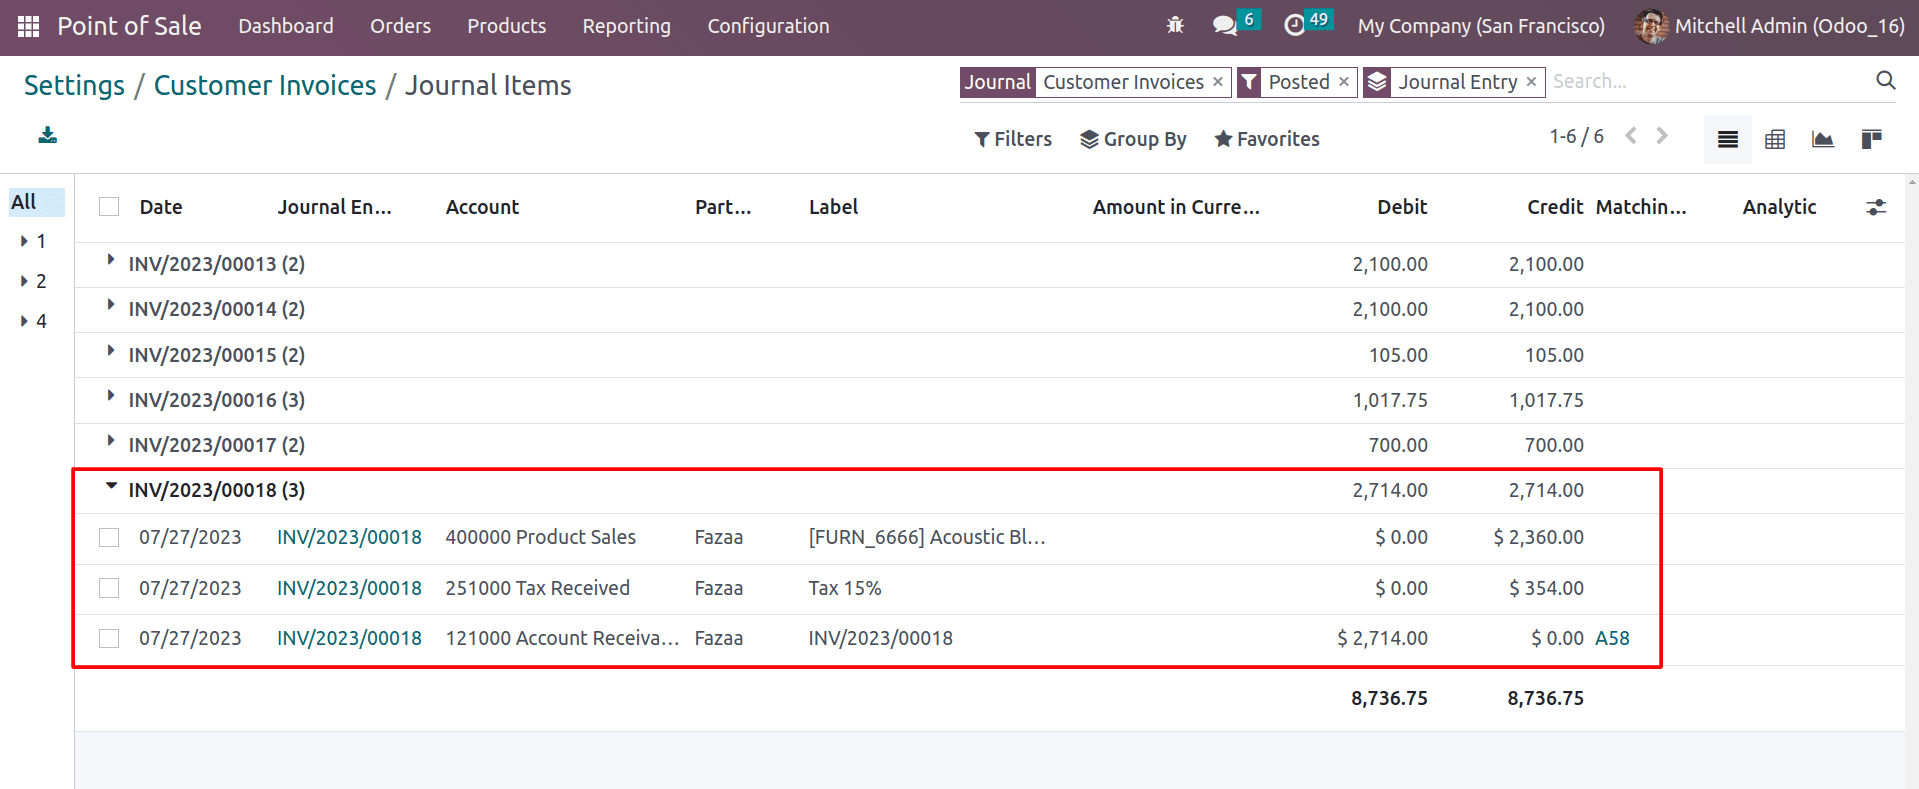 An Overview of Managing Accounts with Odoo 16 POS App-cybrosys